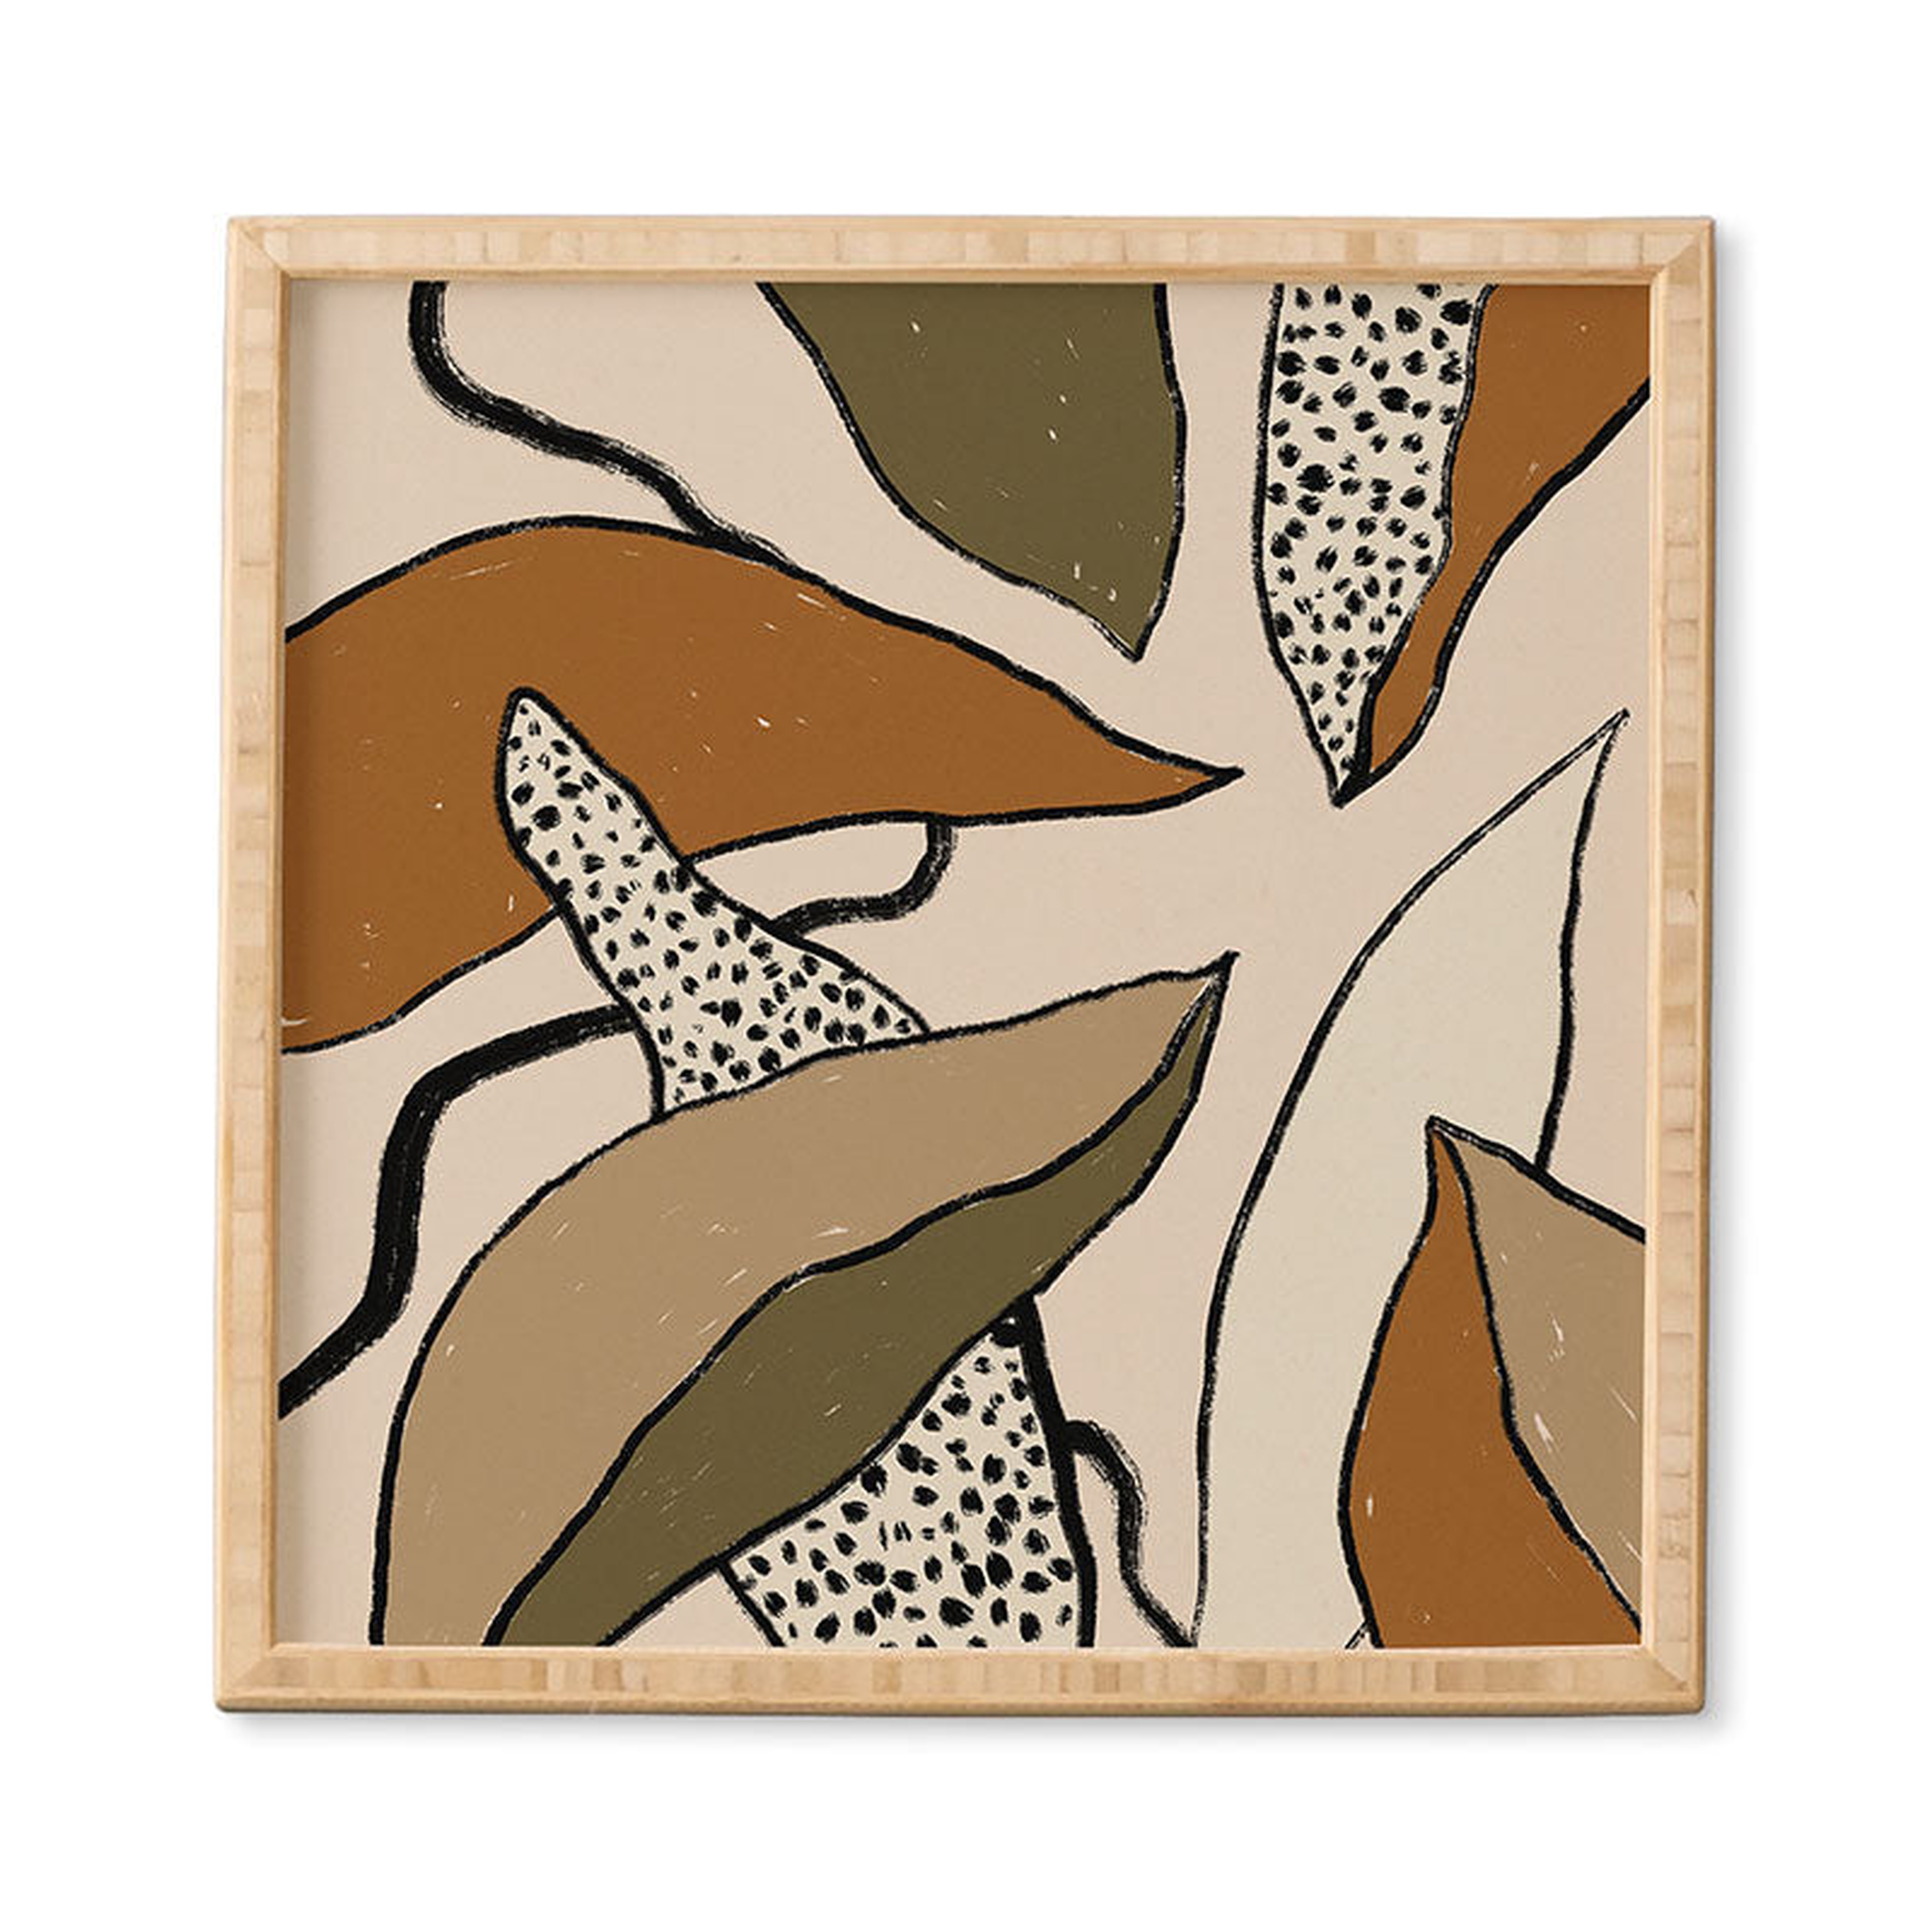 Patterned Tropical Leaves by Alisa Galitsyna - Framed Wall Art Bamboo 12" x 12" - Wander Print Co.